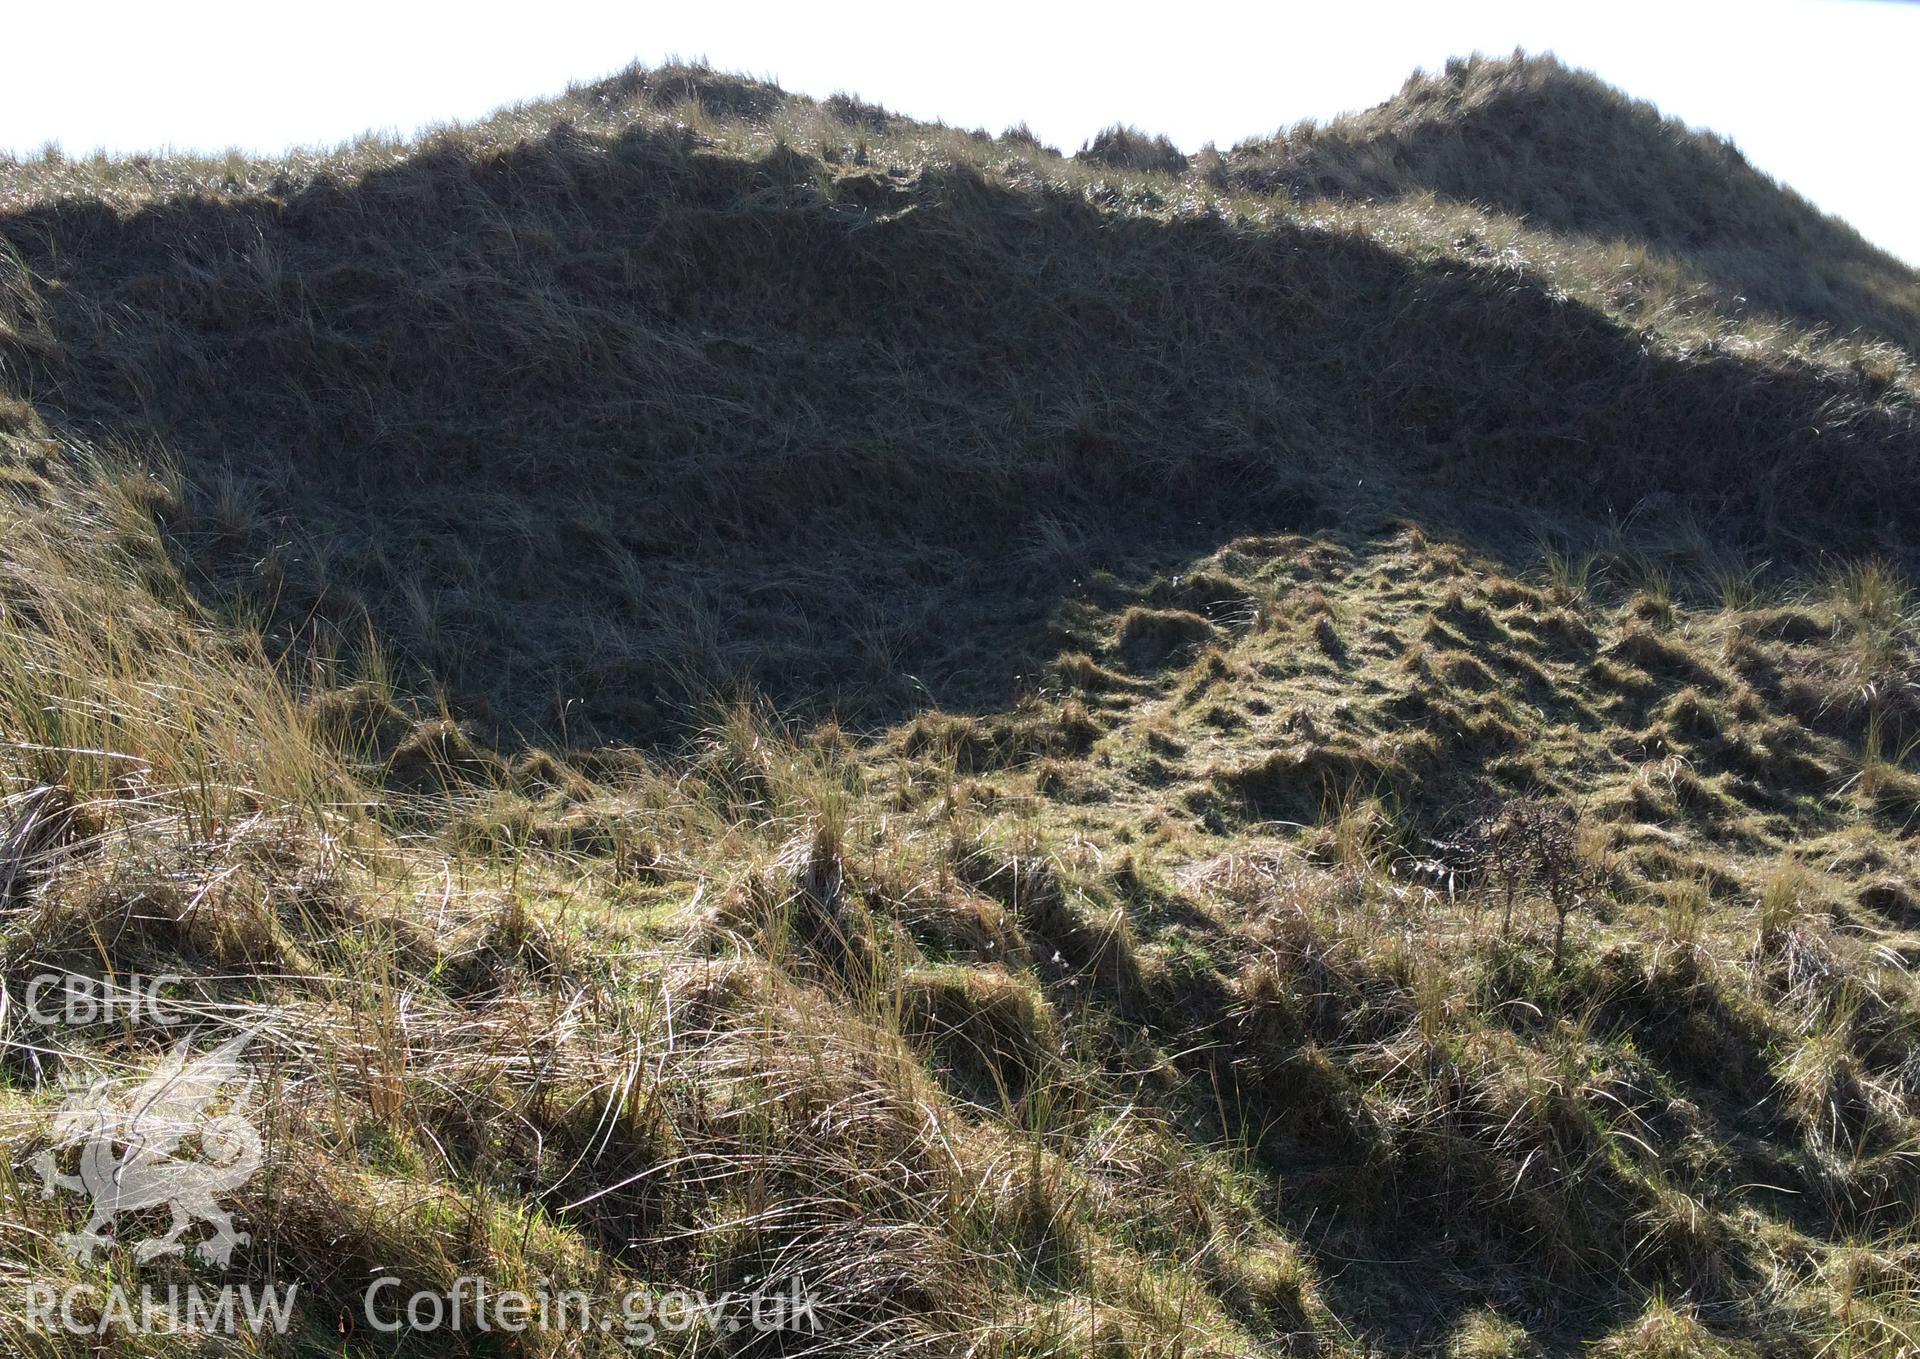 Colour photo showing Broughton Burrows, taken by Paul R. Davis, 30th March 2016.